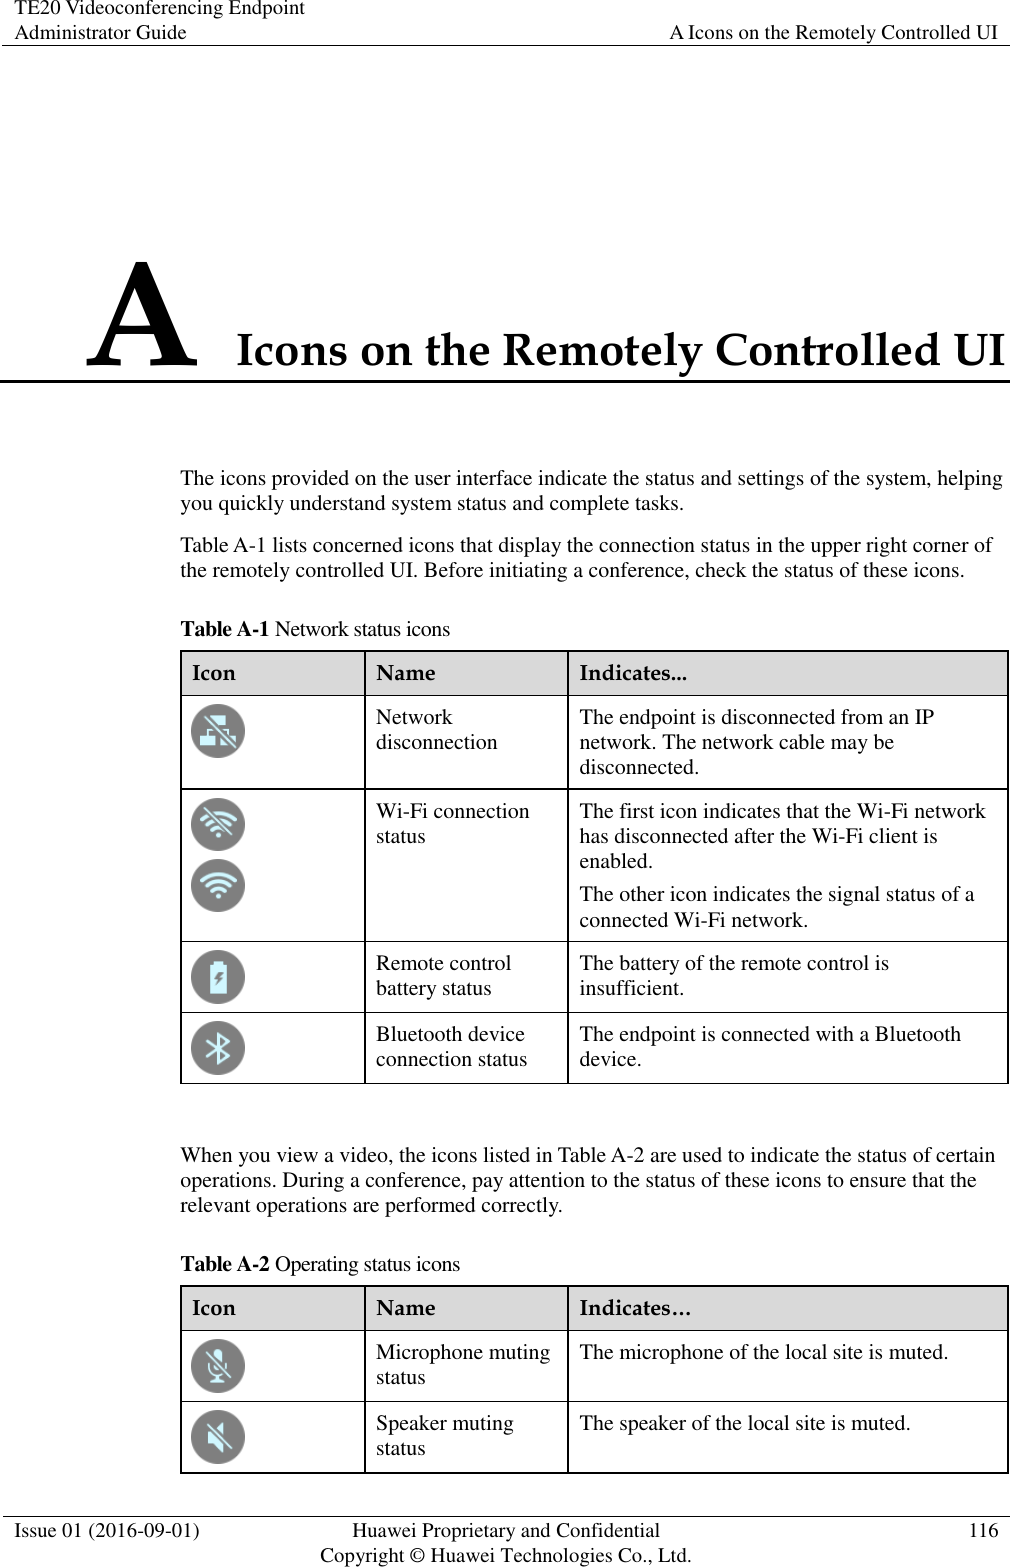 TE20 Videoconferencing Endpoint Administrator Guide A Icons on the Remotely Controlled UI  Issue 01 (2016-09-01) Huawei Proprietary and Confidential                                     Copyright © Huawei Technologies Co., Ltd. 116  A Icons on the Remotely Controlled UI The icons provided on the user interface indicate the status and settings of the system, helping you quickly understand system status and complete tasks. Table A-1 lists concerned icons that display the connection status in the upper right corner of the remotely controlled UI. Before initiating a conference, check the status of these icons. Table A-1 Network status icons Icon Name Indicates...  Network disconnection The endpoint is disconnected from an IP network. The network cable may be disconnected.   Wi-Fi connection status The first icon indicates that the Wi-Fi network has disconnected after the Wi-Fi client is enabled. The other icon indicates the signal status of a connected Wi-Fi network.  Remote control battery status The battery of the remote control is insufficient.  Bluetooth device connection status The endpoint is connected with a Bluetooth device.  When you view a video, the icons listed in Table A-2 are used to indicate the status of certain operations. During a conference, pay attention to the status of these icons to ensure that the relevant operations are performed correctly. Table A-2 Operating status icons Icon Name Indicates…  Microphone muting status The microphone of the local site is muted.  Speaker muting status The speaker of the local site is muted. 